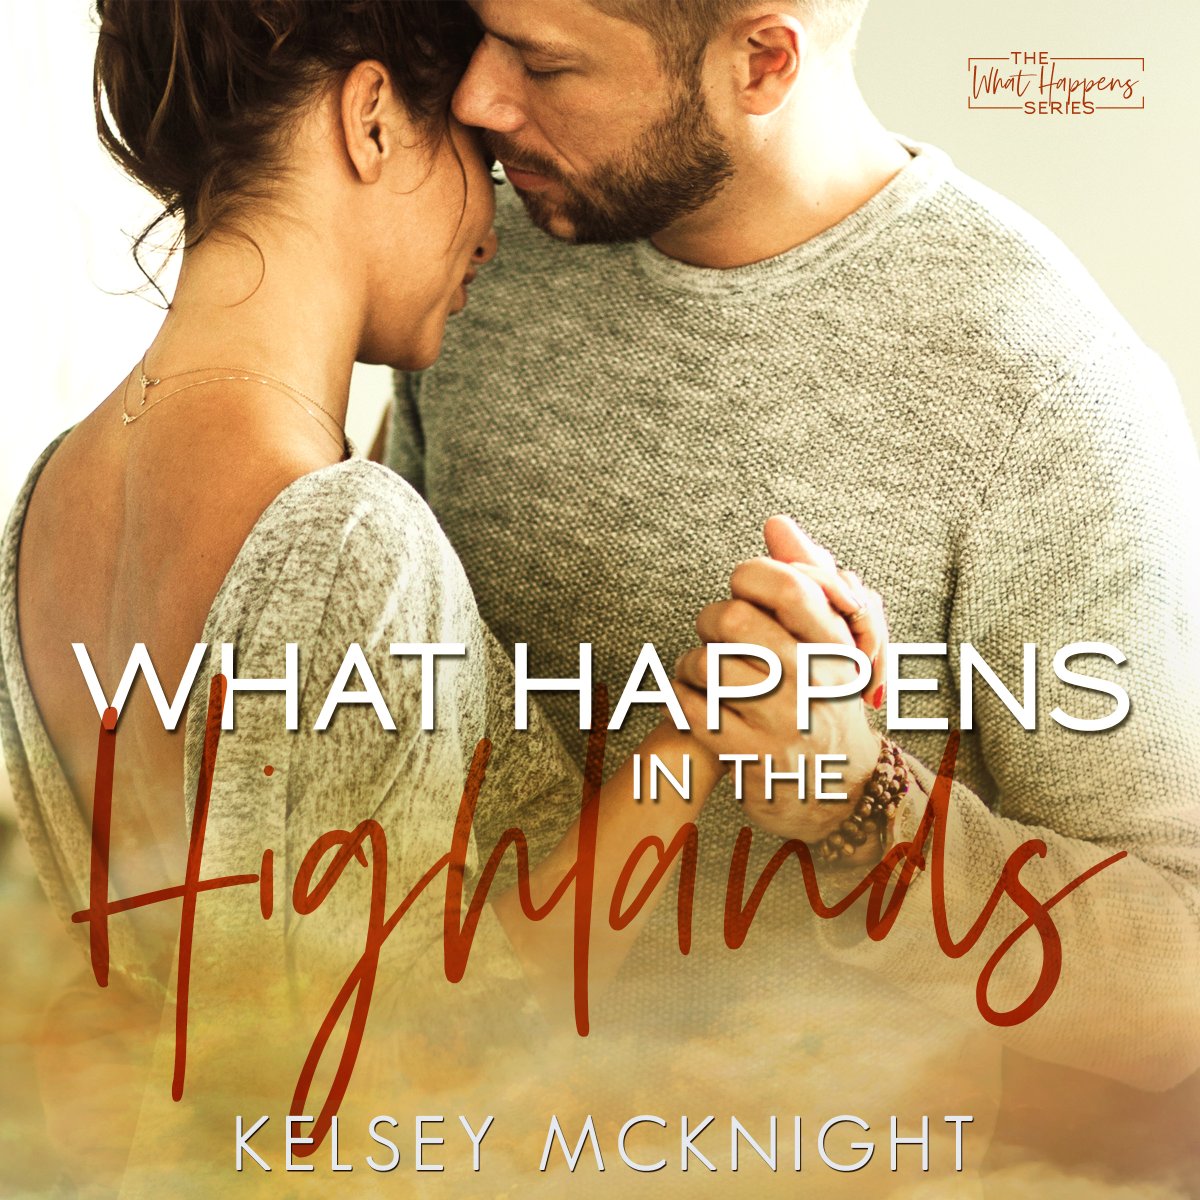 Match made in heaven or maid of dishonor? WHAT HAPPENS IN THE HIGHLANDS by @KelseyMMcK is FREE for a limited time! Get your copy now: bit.ly/4beDMCr #readztule #romance